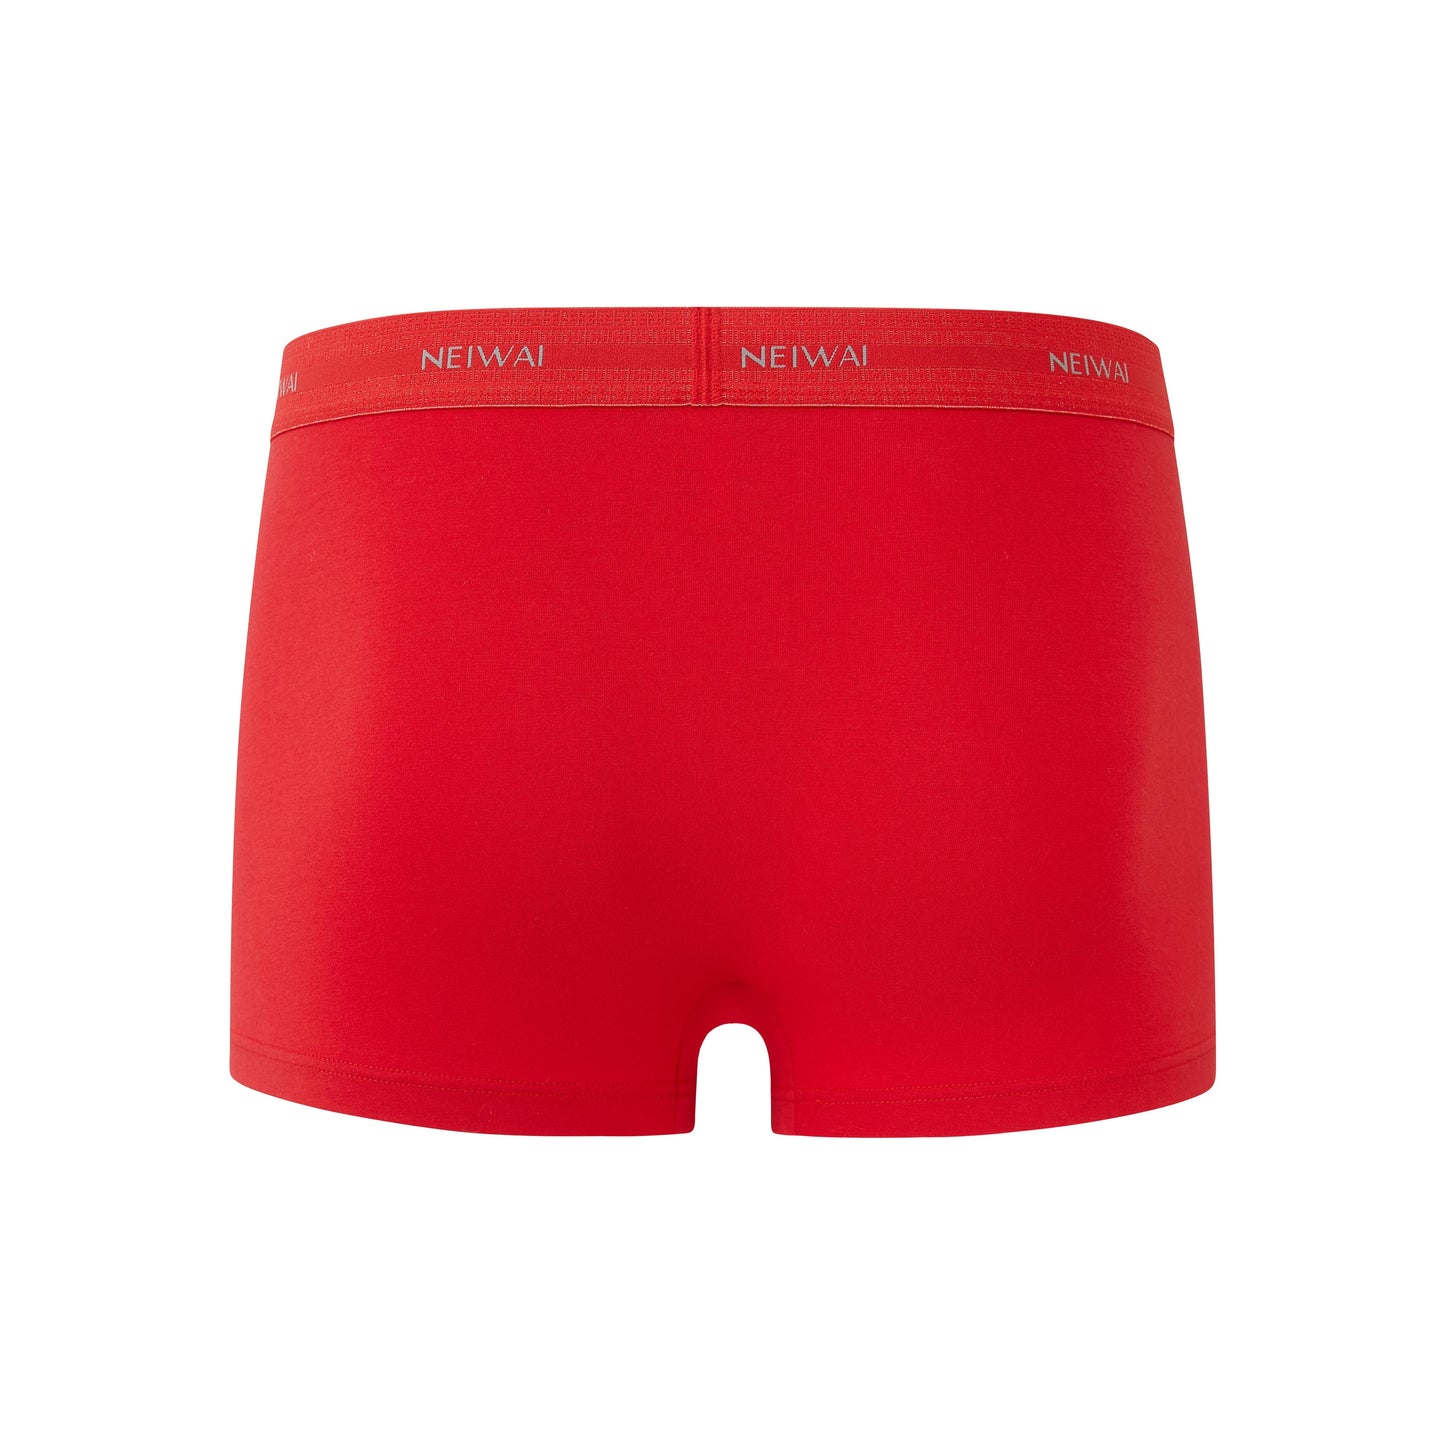 a pair of red brief from back